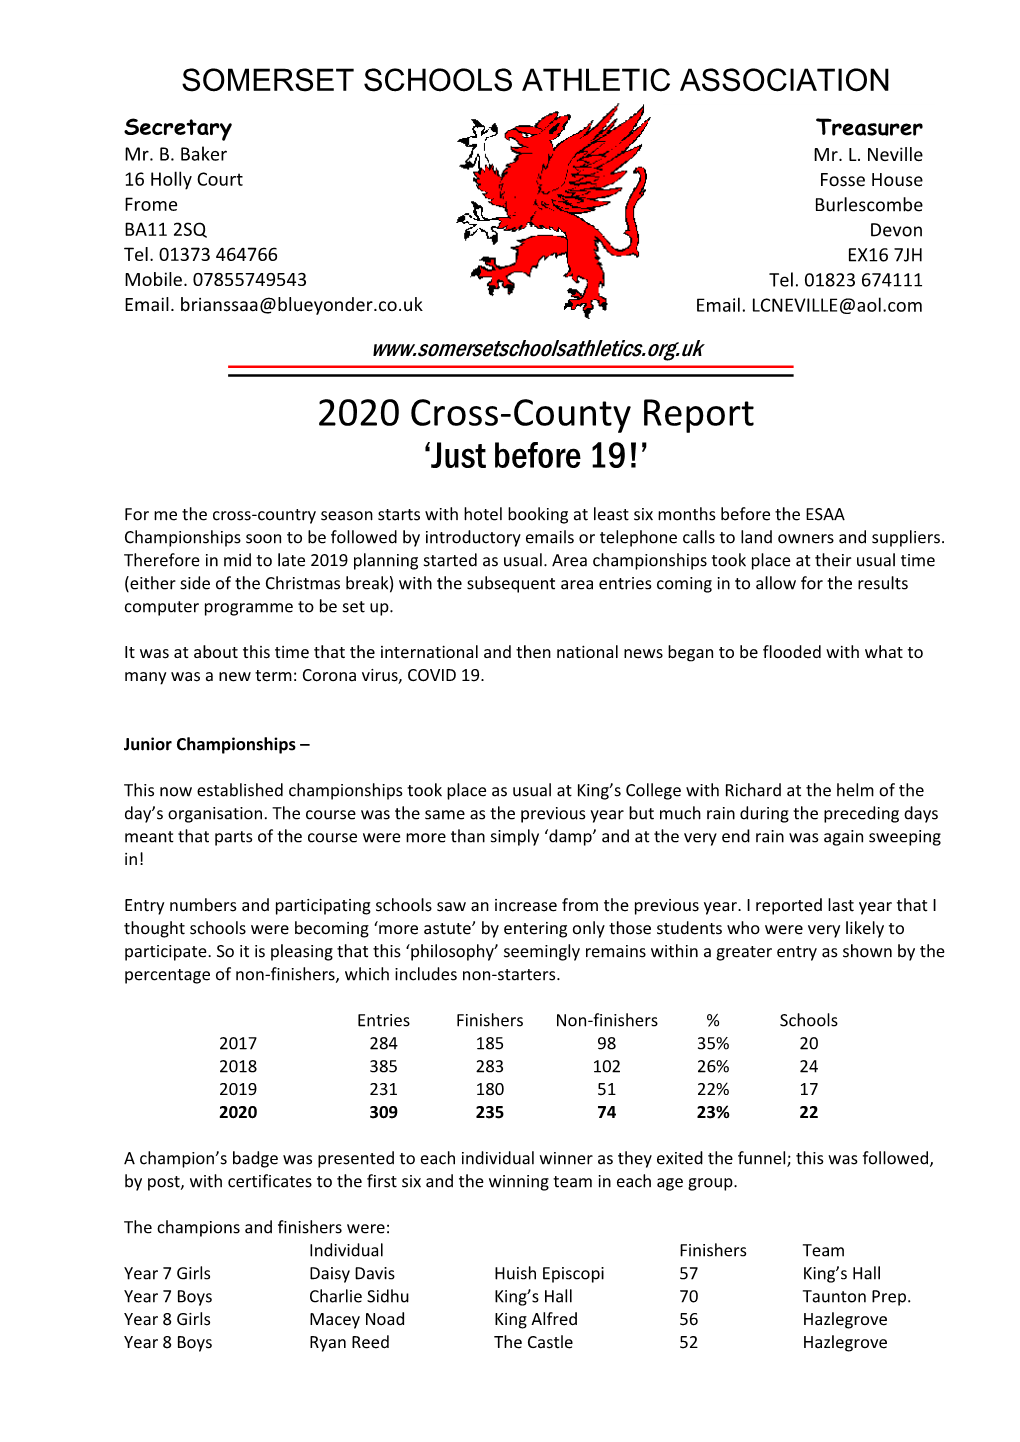 2020 Cross-County Report ‘Just Before 19!’